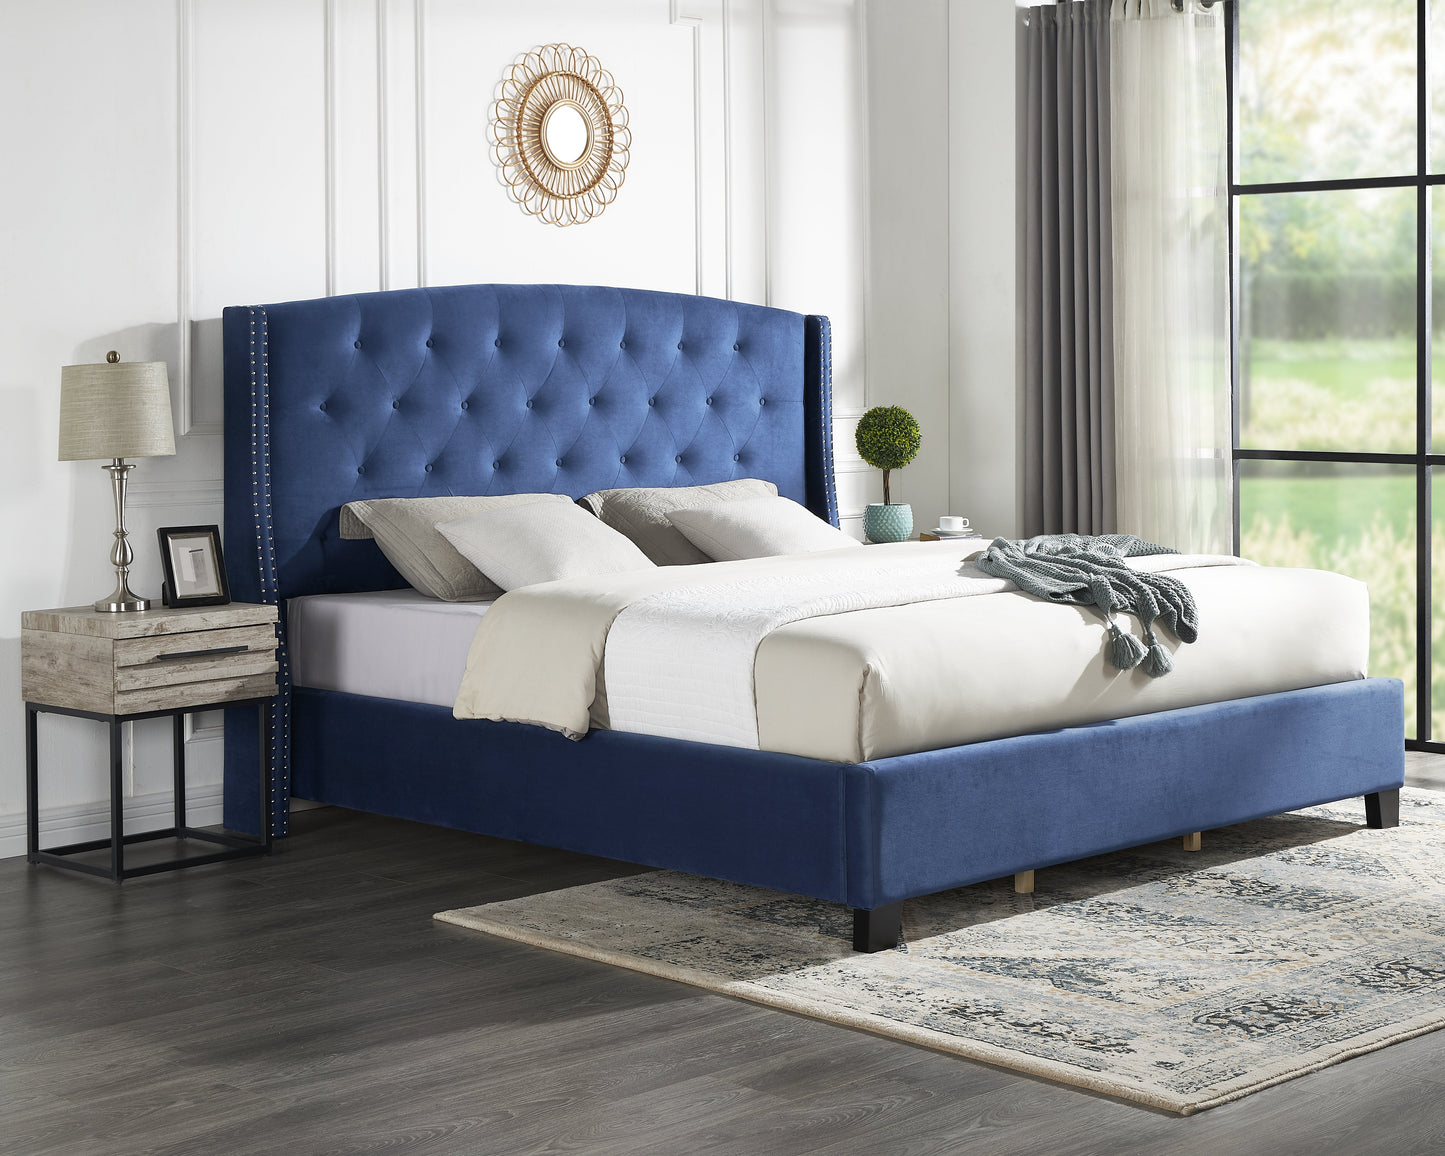 Fentina 3-Piece Upholstered Bedroom Set, Tufted Velvet Wingback Bed with Two Nightstands